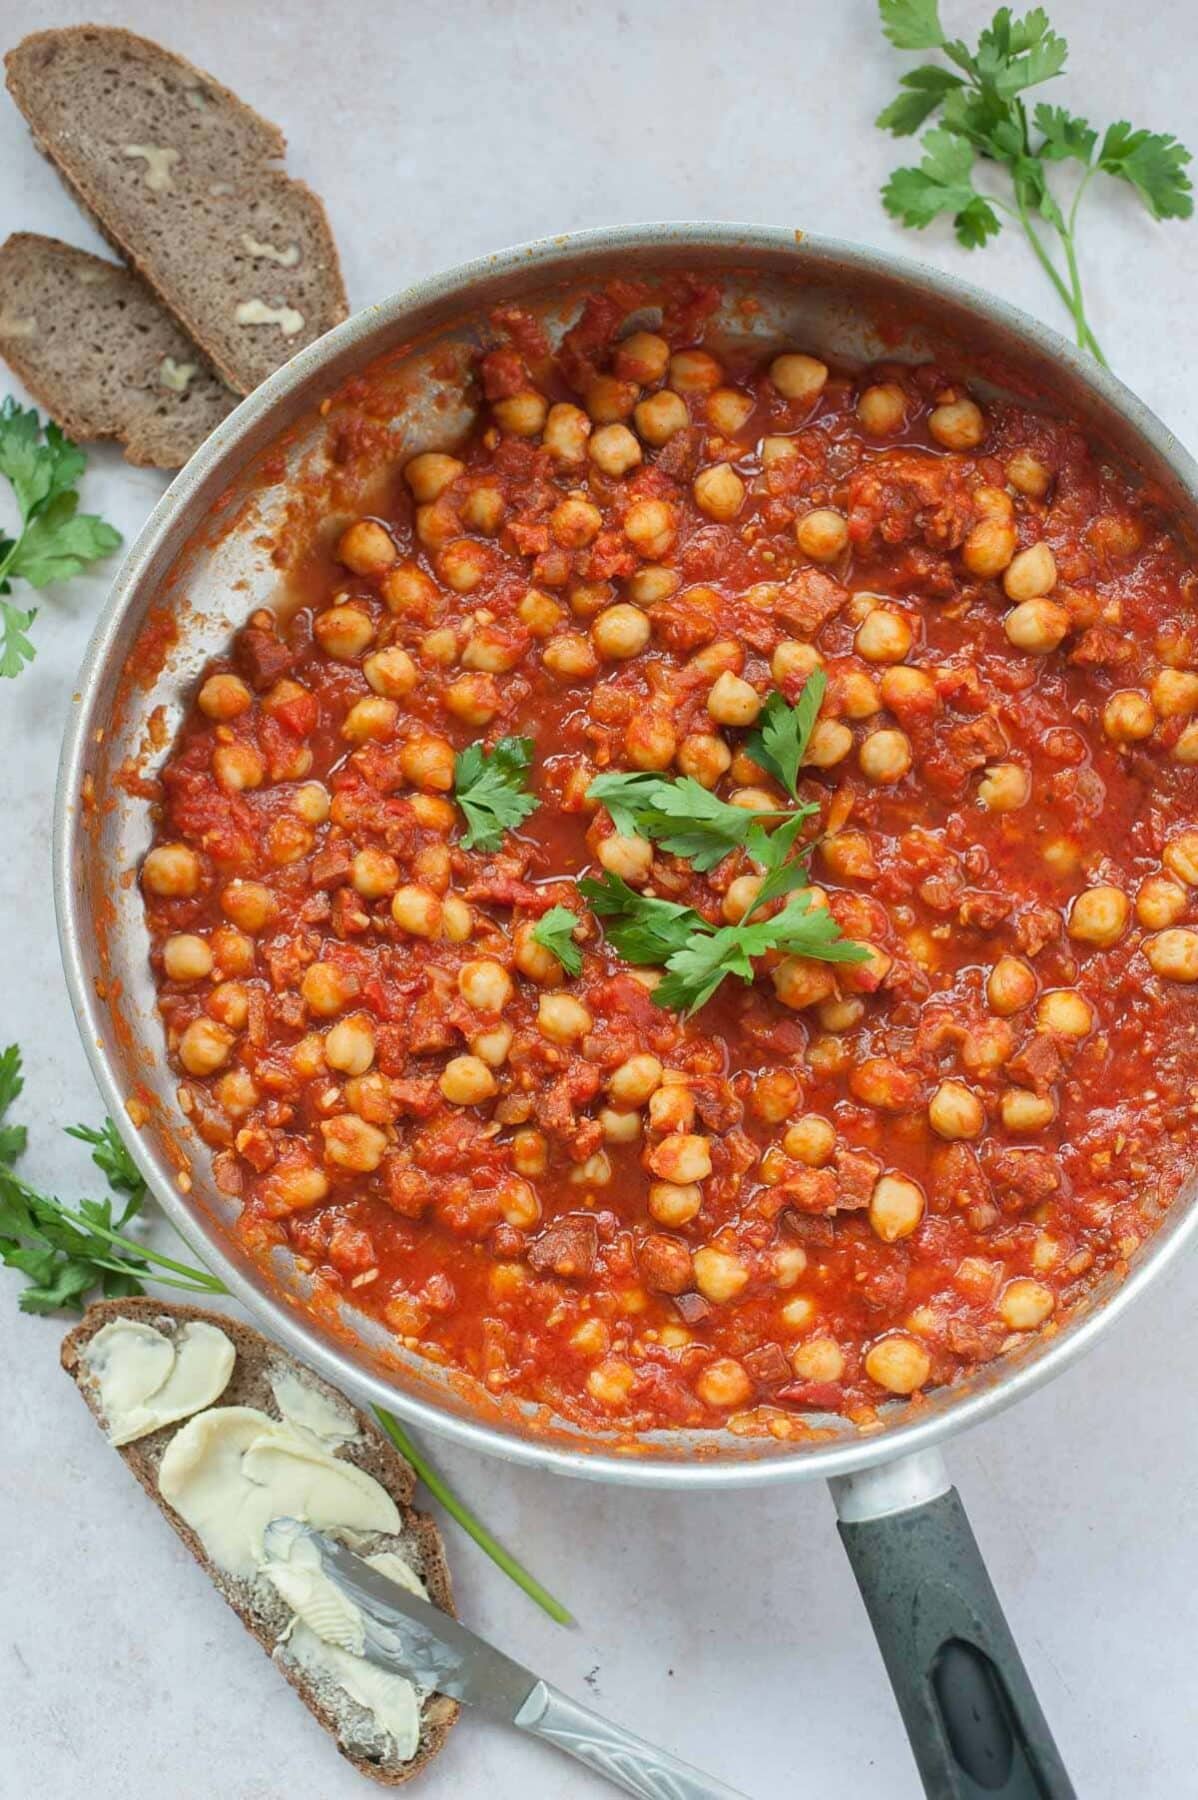 Chickpeas with chorizo in tomato sauce in a silver frying pan.